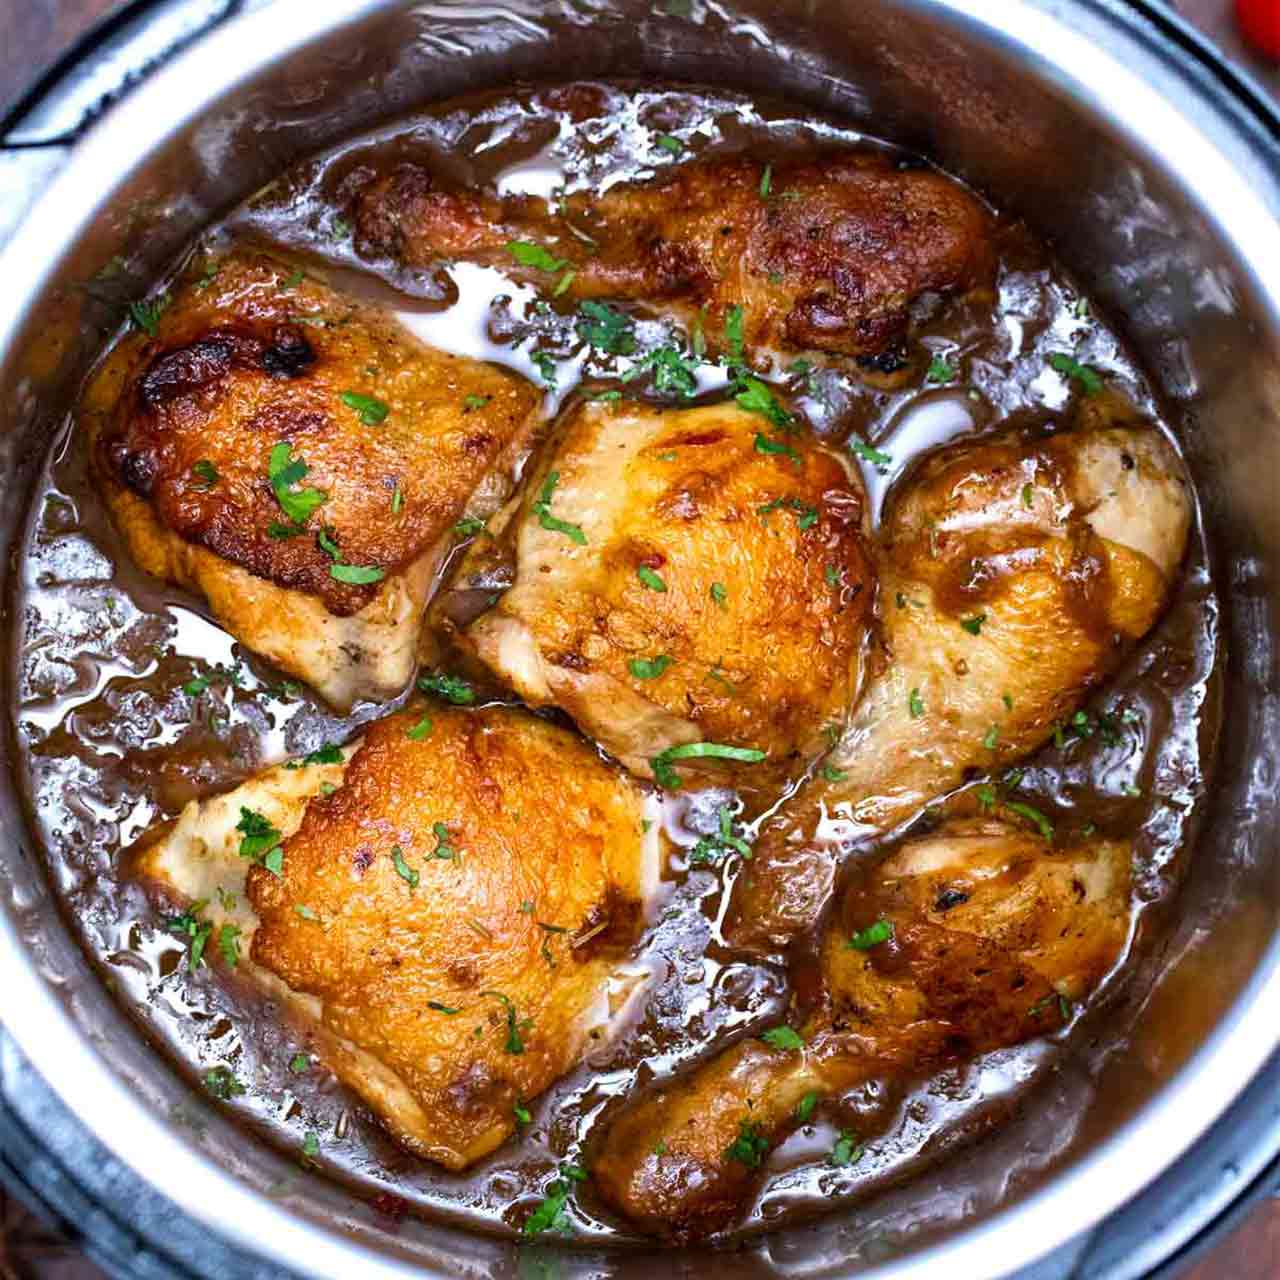 Instant Pot Balsamic Chicken [Video] - Sweet and Savory Meals